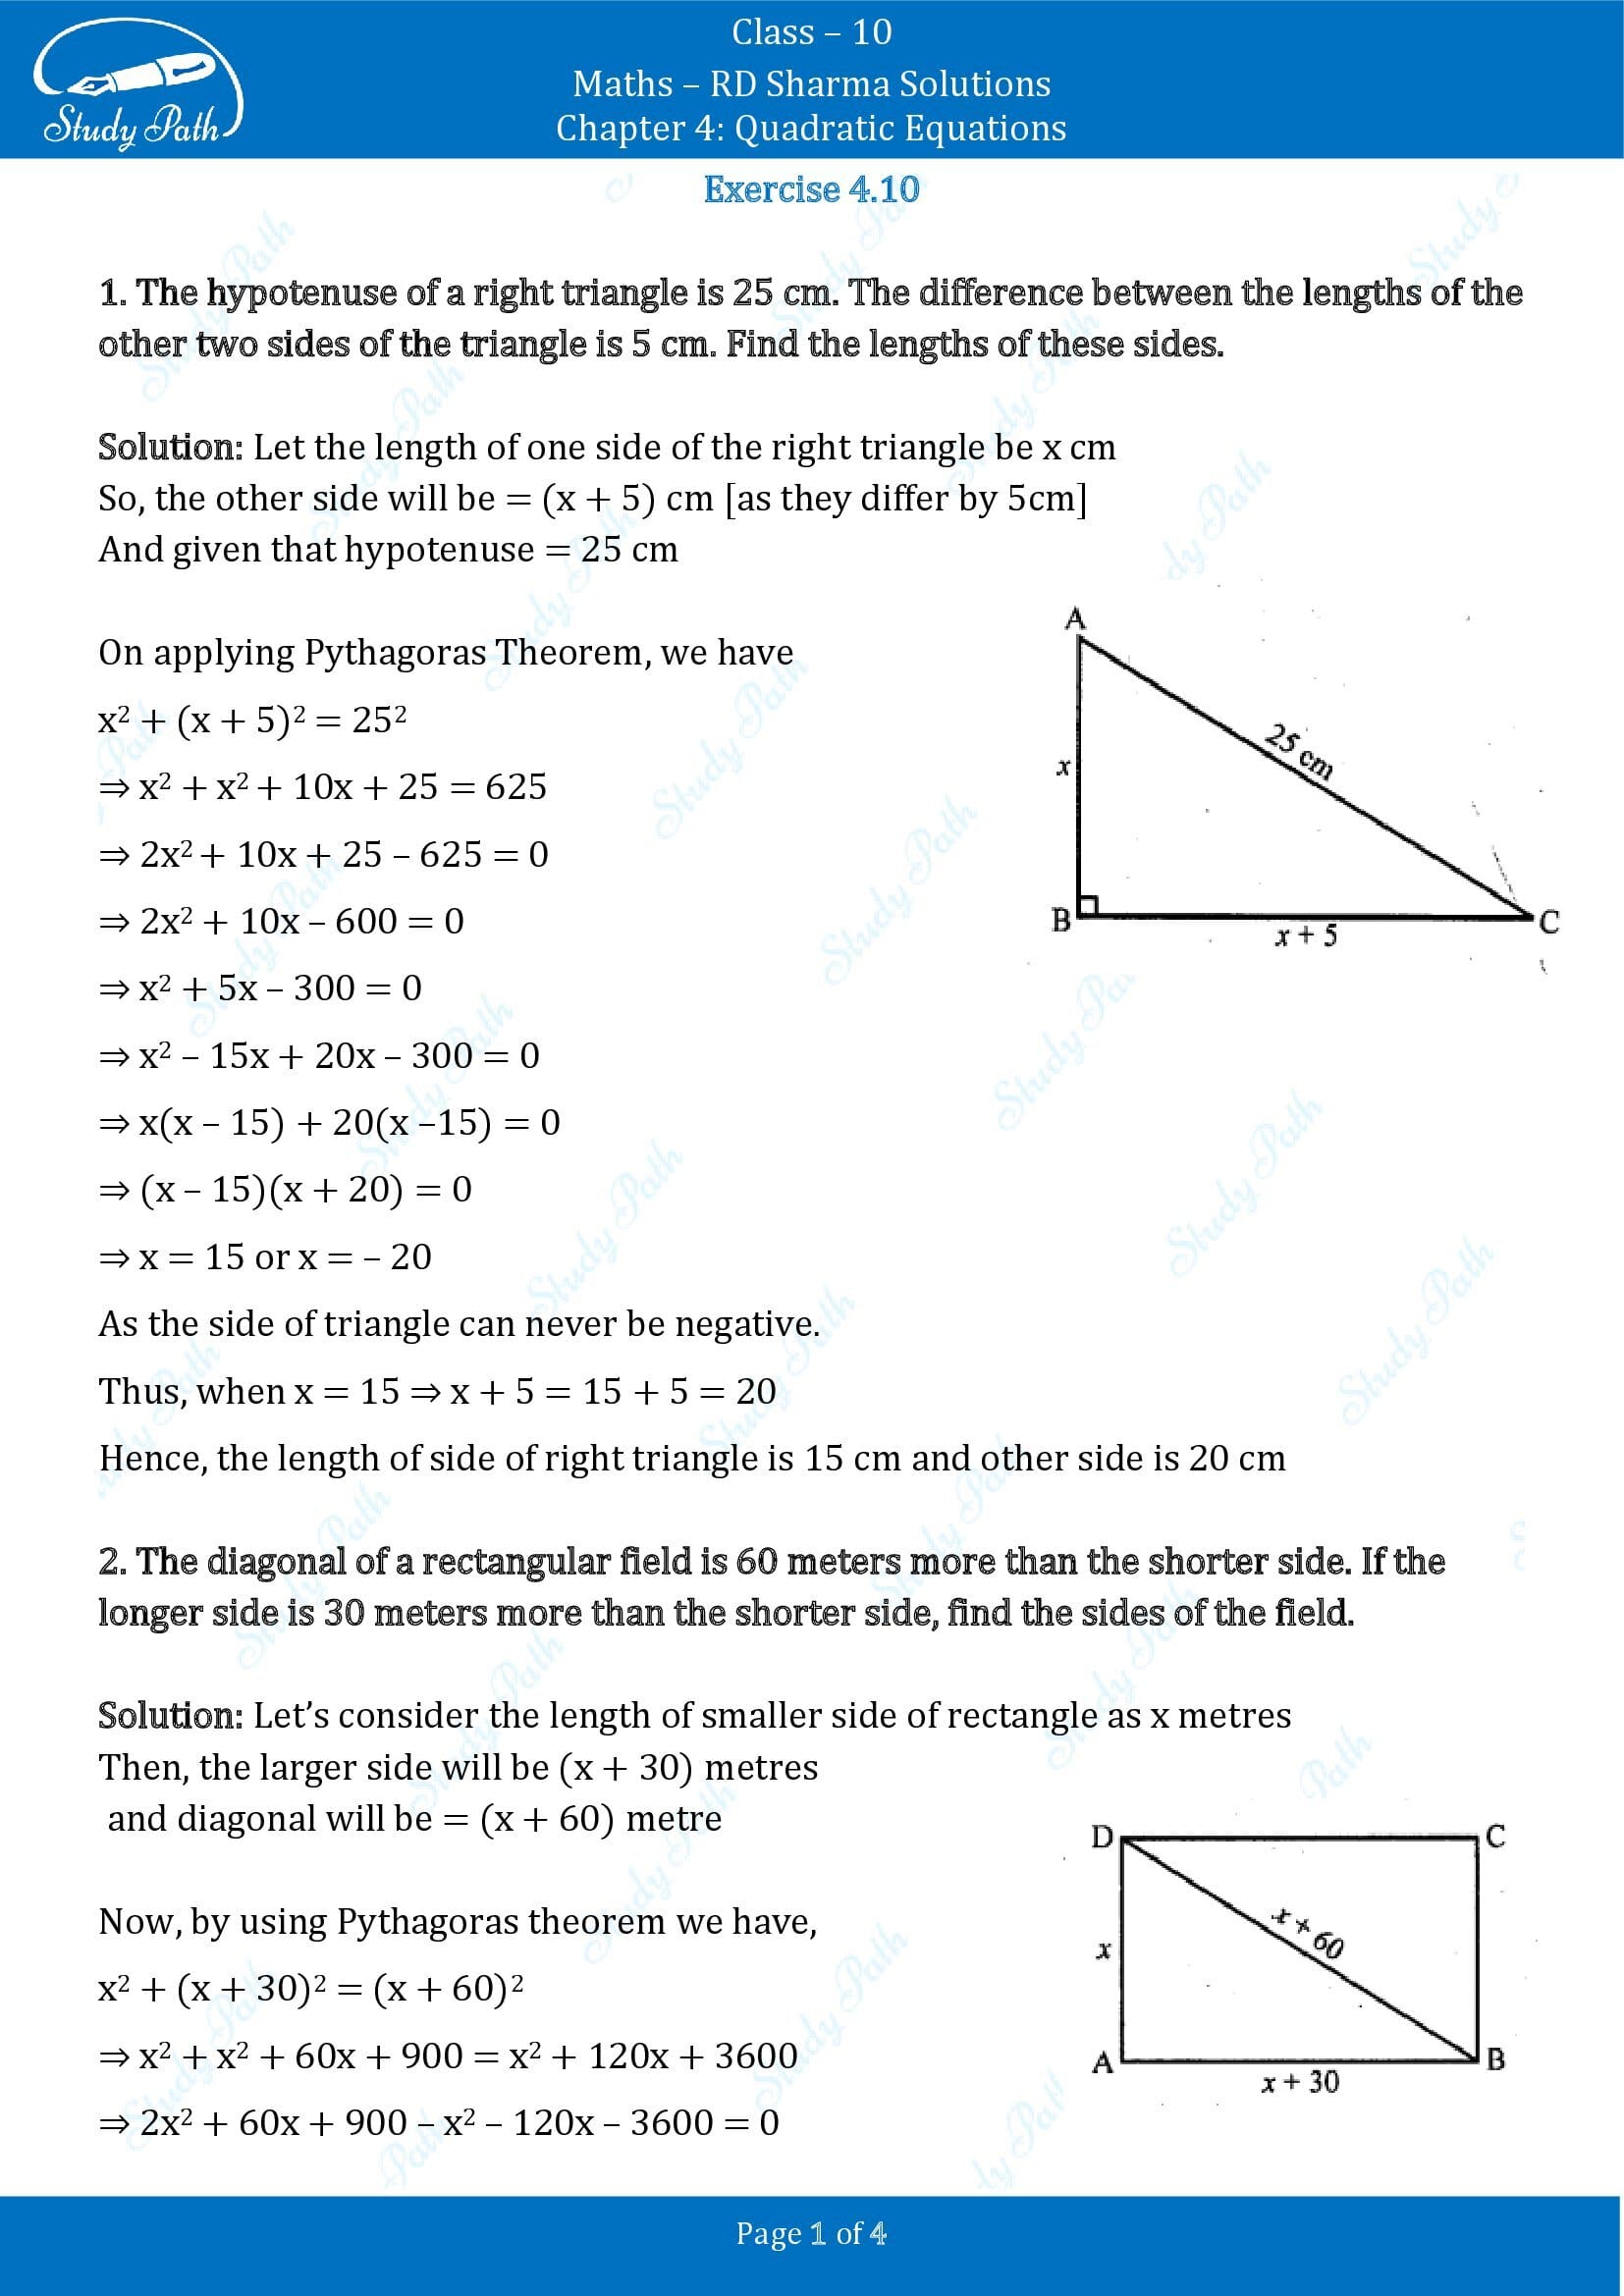 RD Sharma Solutions Class 10 Chapter 4 Quadratic Equations Exercise 4.10 00001